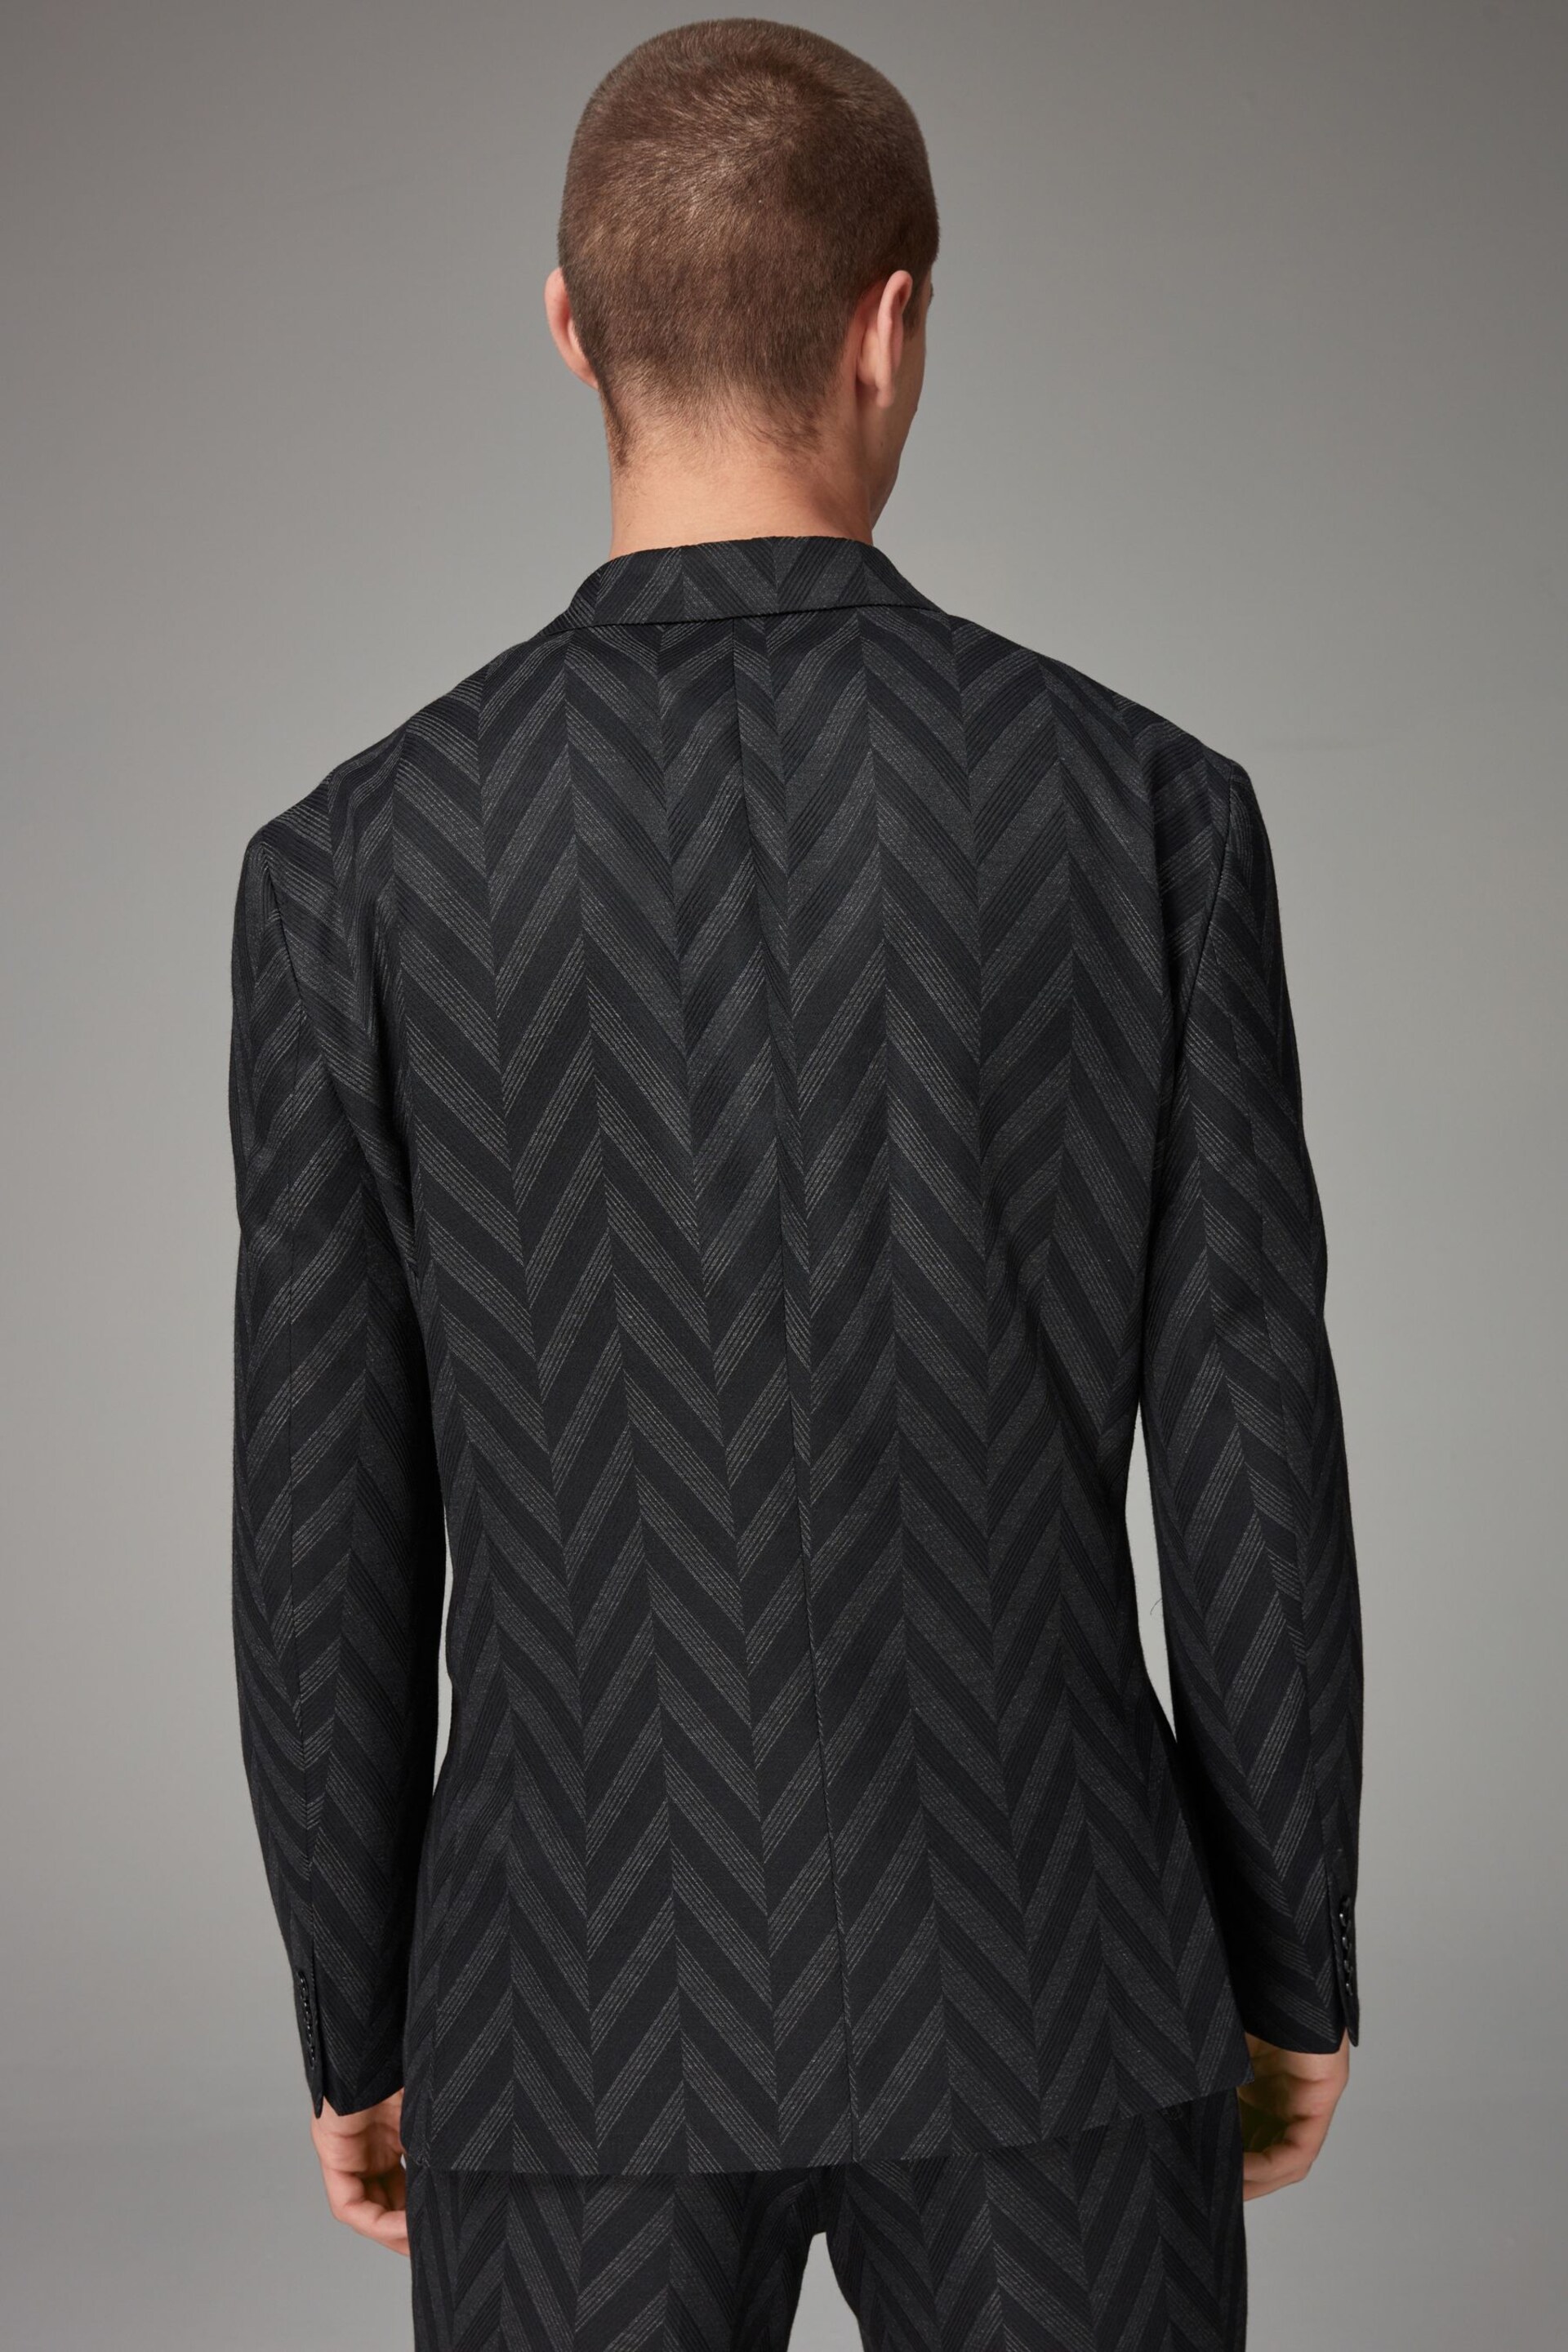 Charcoal Grey EDIT Relaxed Pattern Suit Jacket - Image 3 of 9